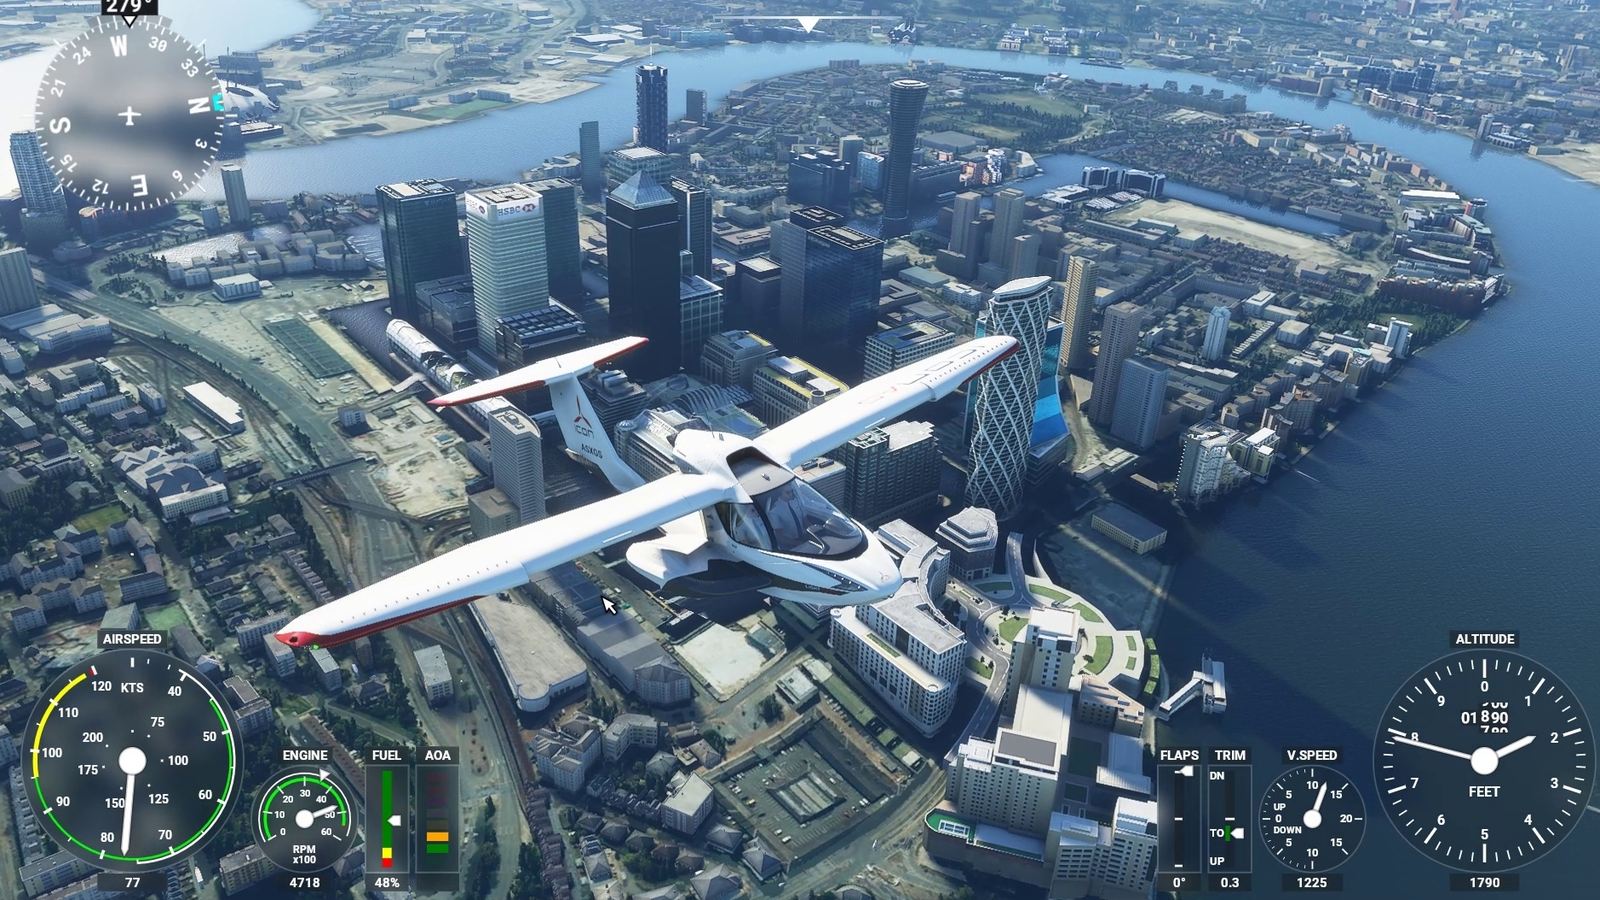 Which version of Microsoft Flight Simulator 2020 should you buy